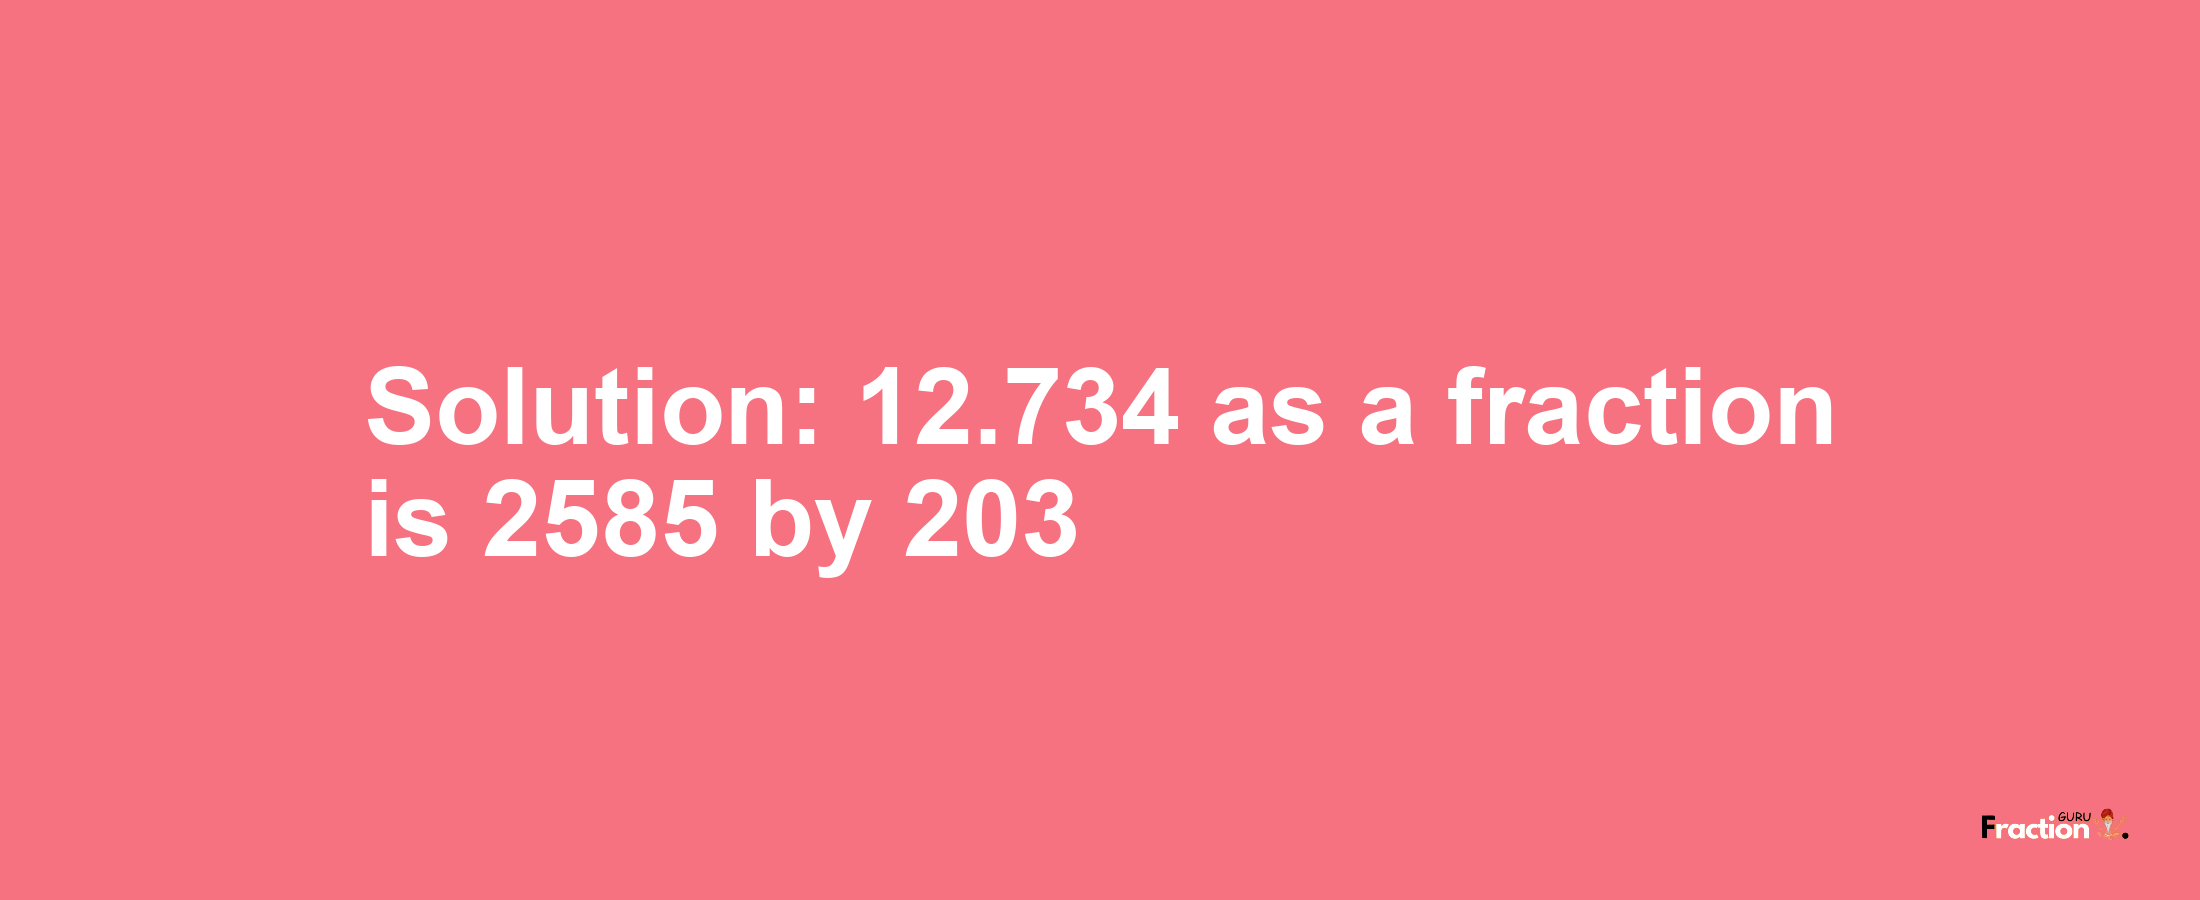 Solution:12.734 as a fraction is 2585/203